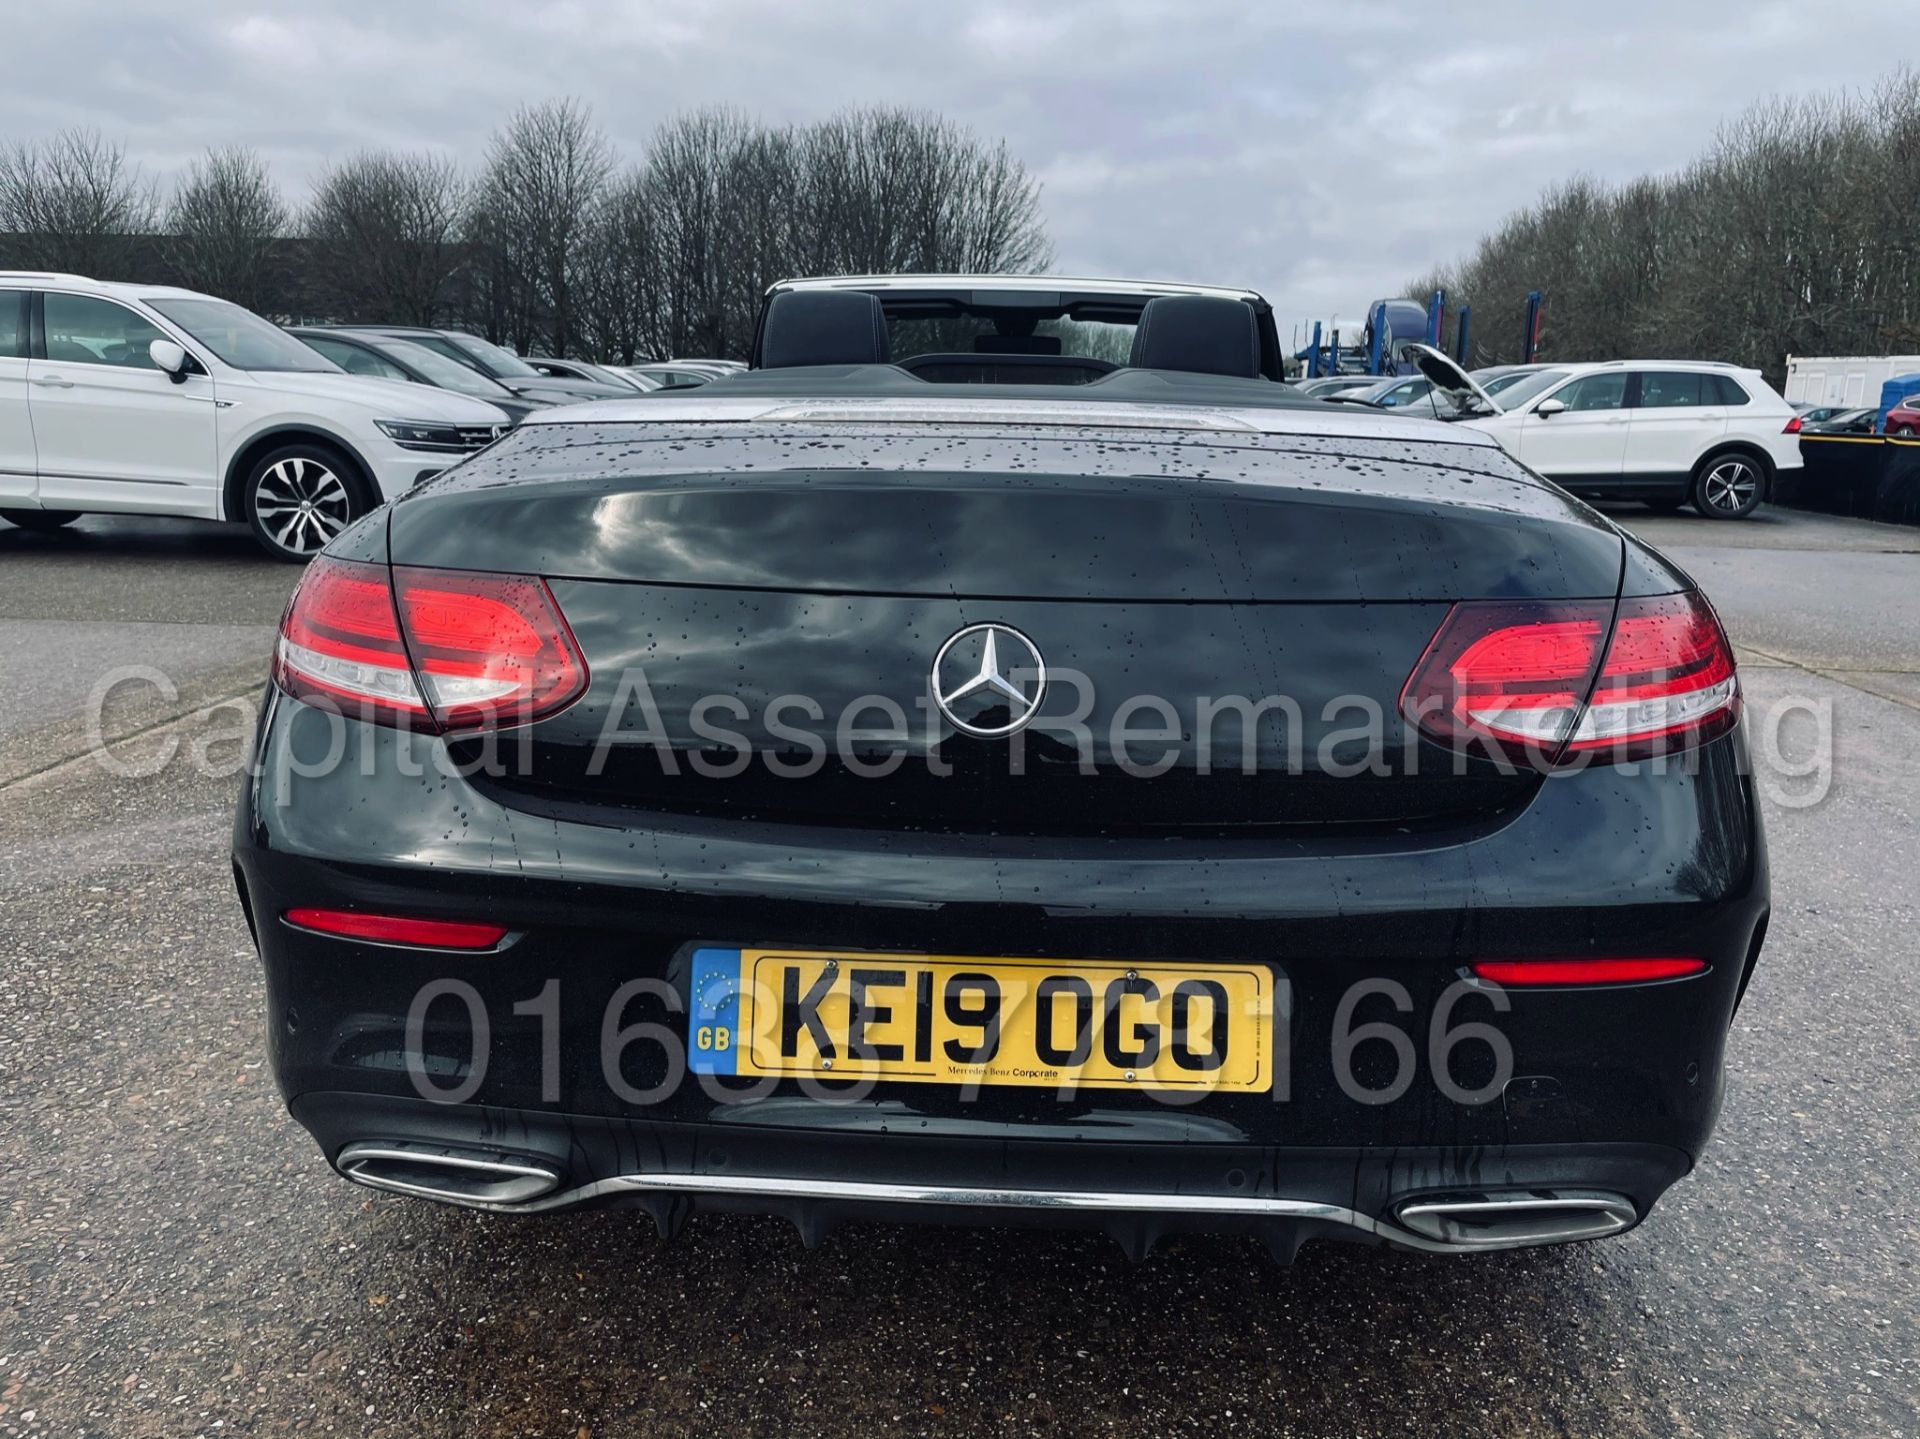 (ON SALE) MERCEDES-BENZ C220D *AMG LINE - CABRIOLET* (2019) '9G TRONIC AUTO - LEATHER - SAT NAV' - Image 13 of 56